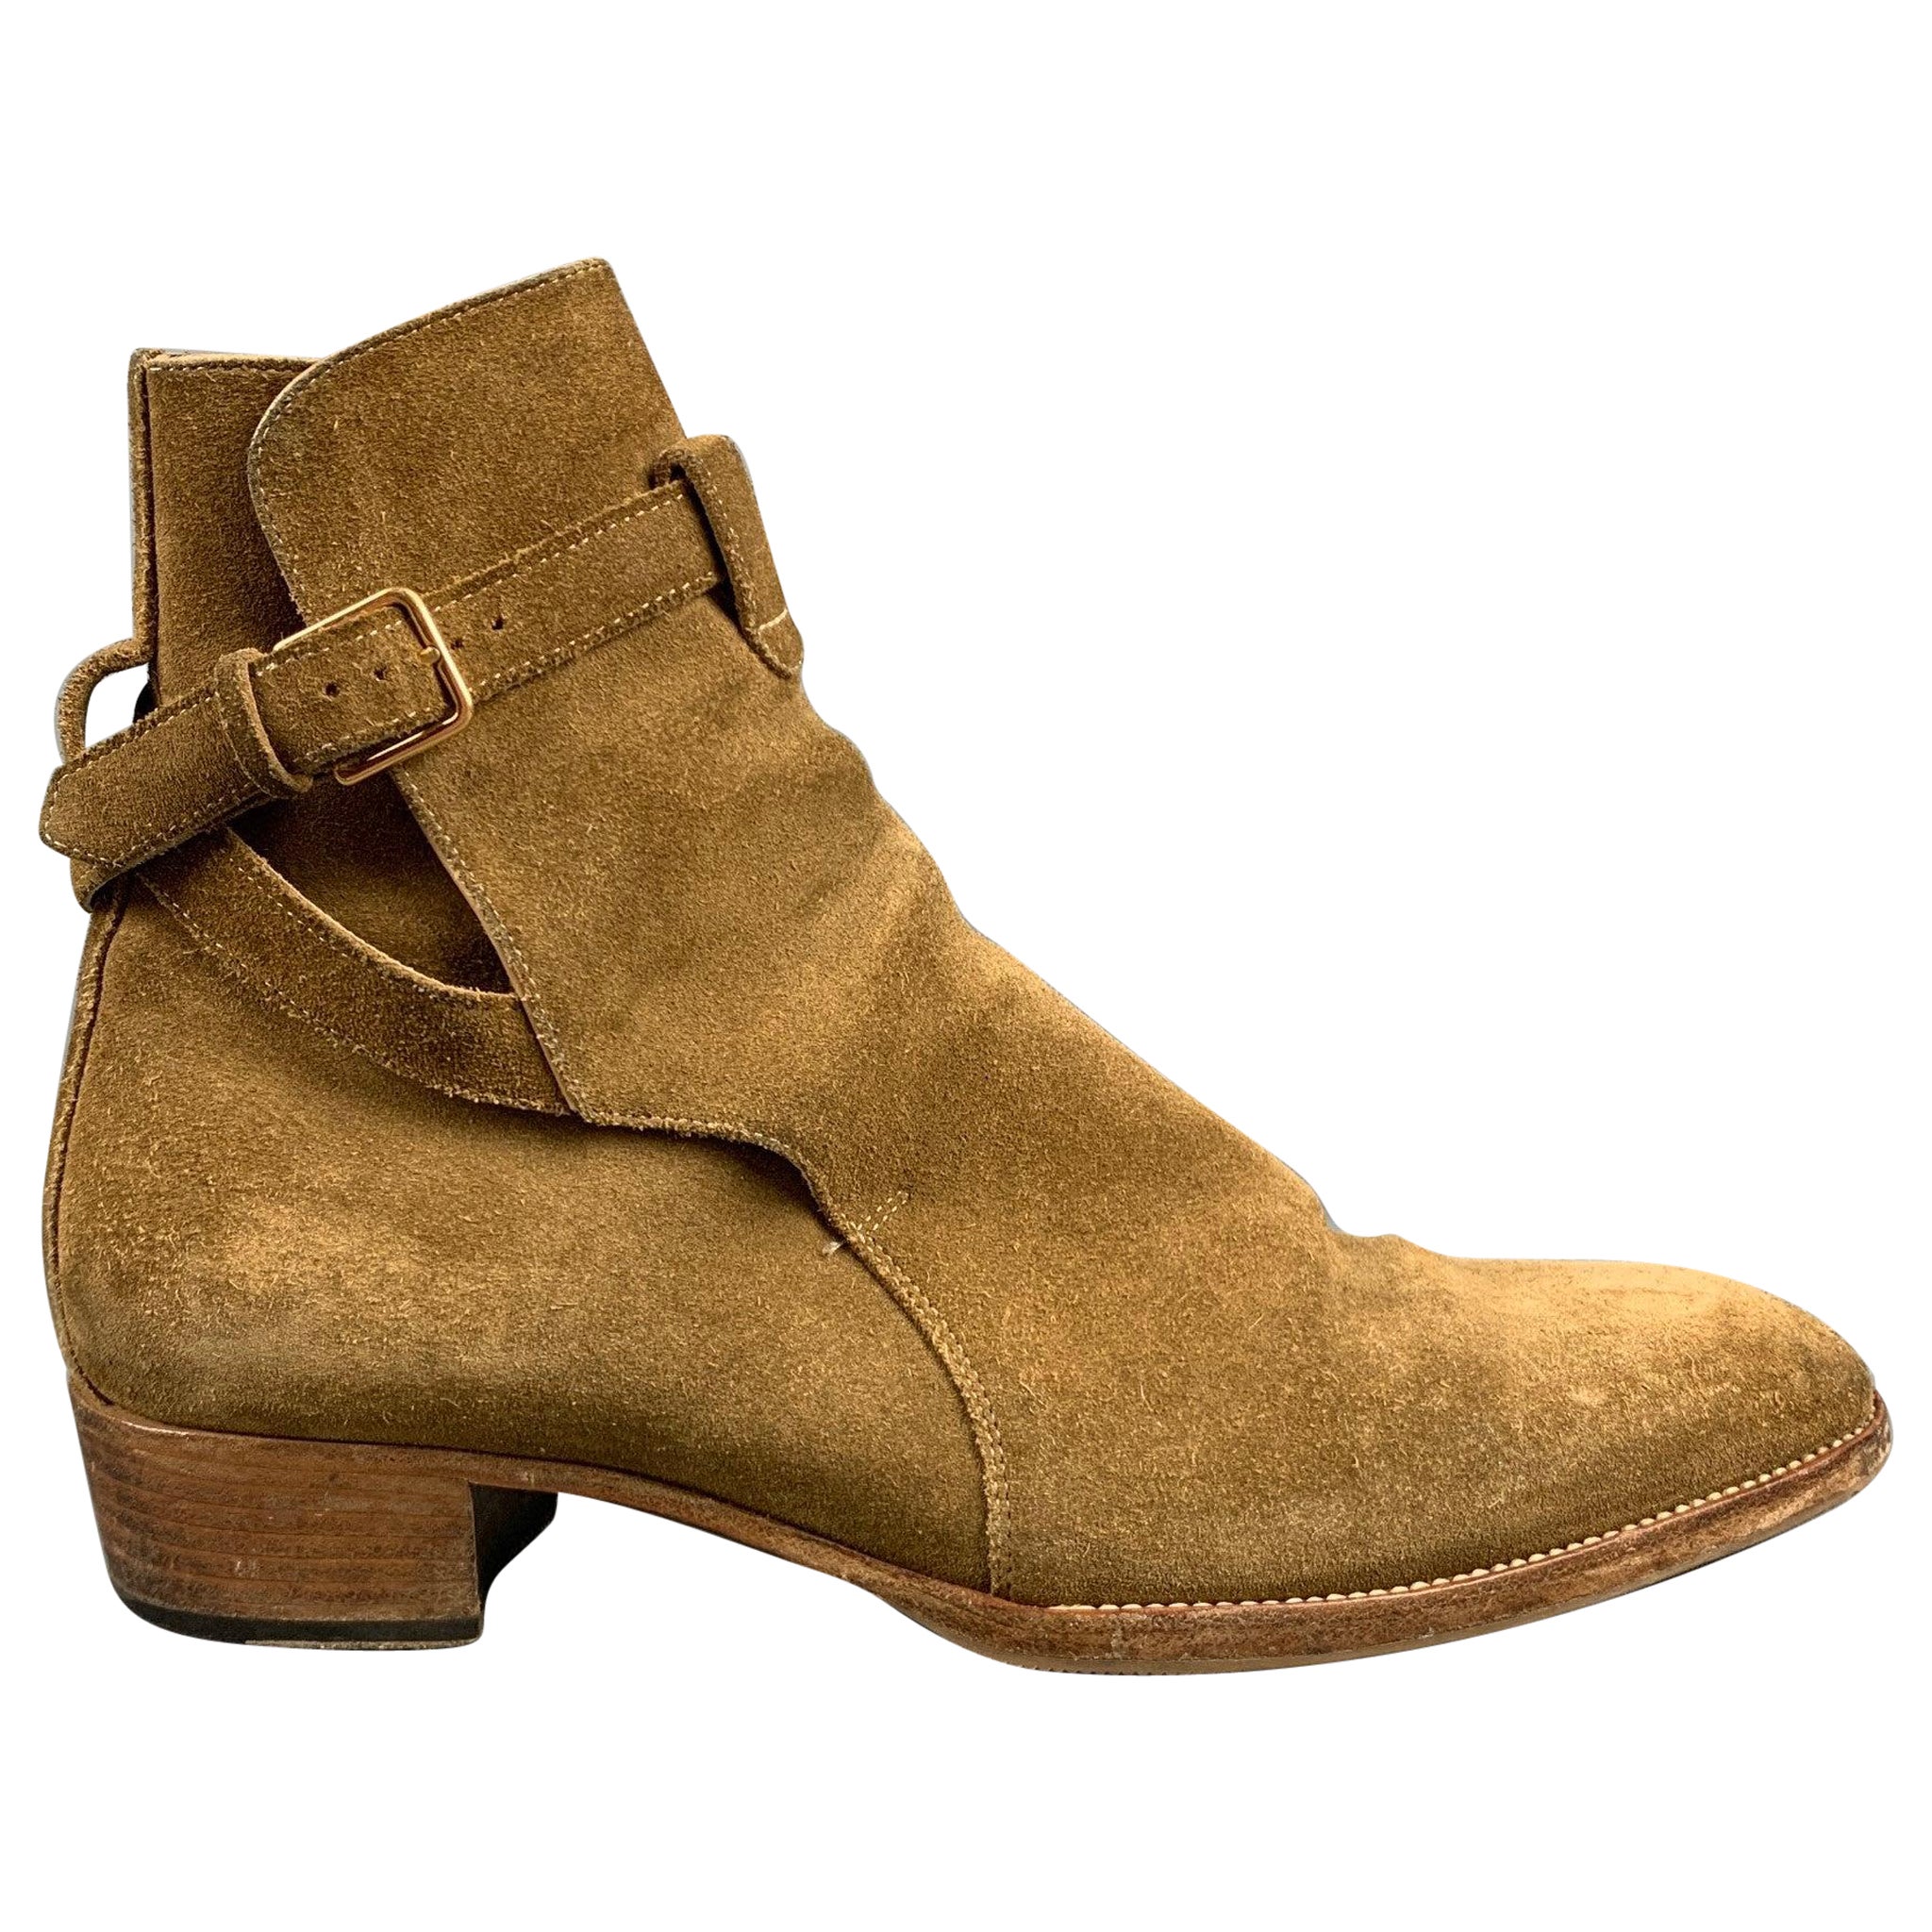 SAINT LAURENT Size 7 Tan Solid Leather Ankle Boots For Sale